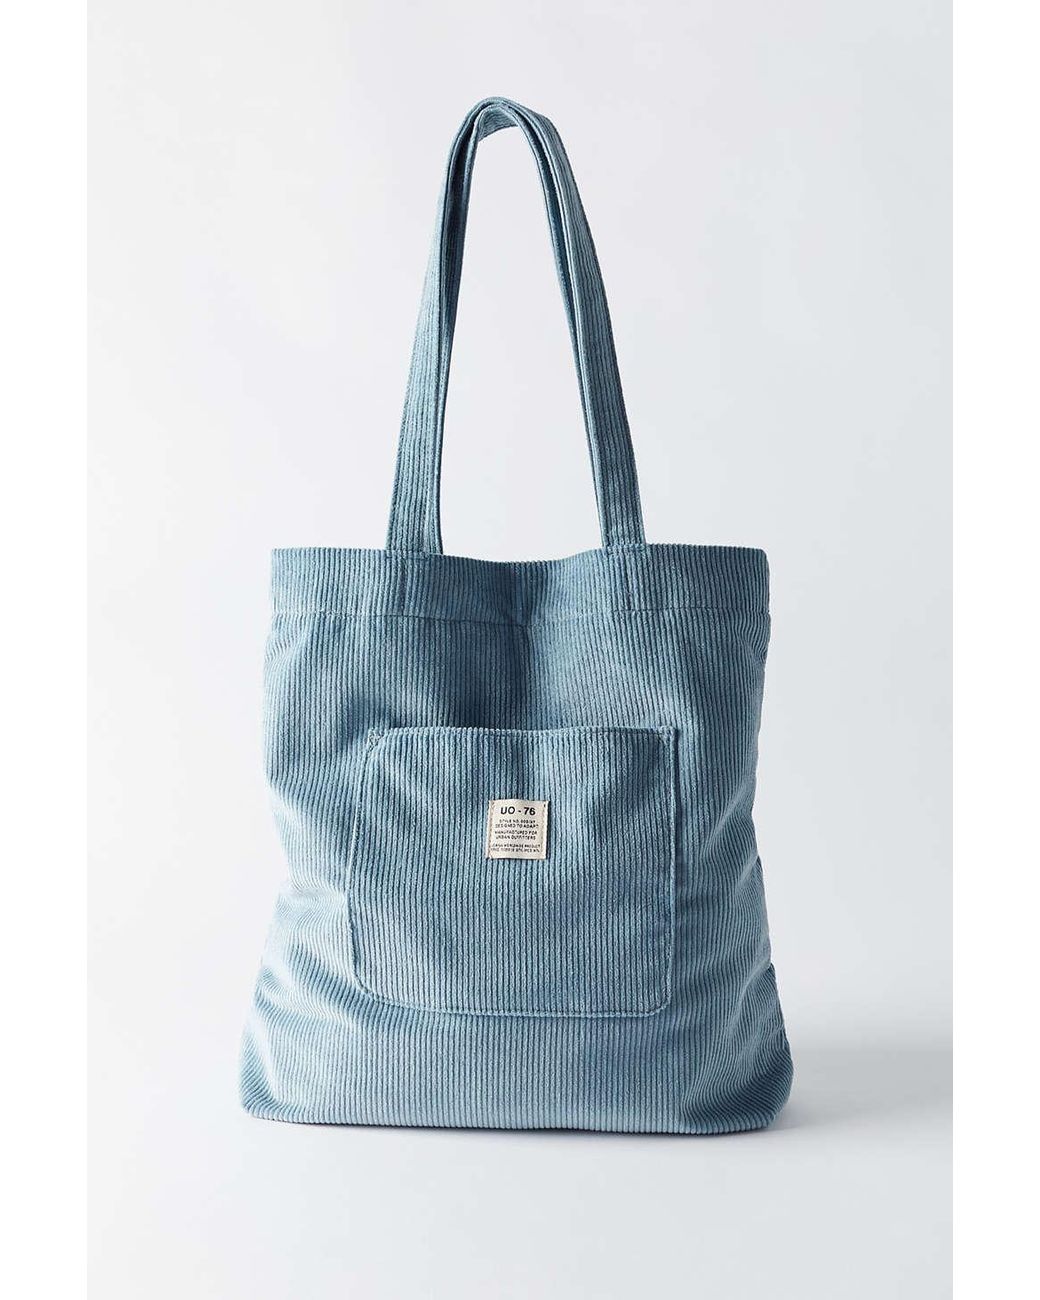 Urban Outfitters Uo Basic Corduroy Tote Bag in Gray Lyst